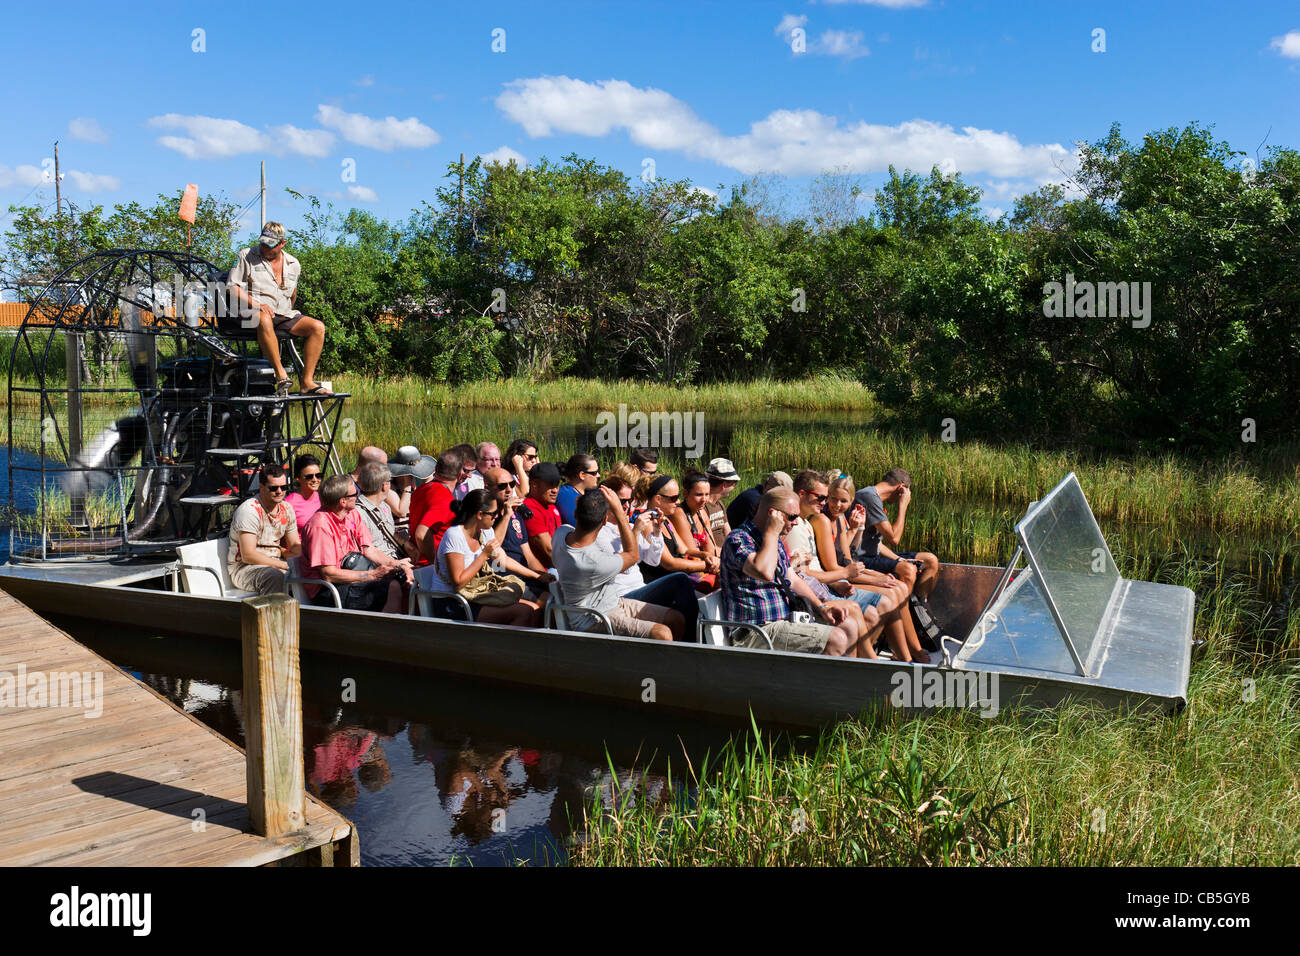 Airboat tour leaving the dock at Gator Park Airboat Tours on Highway 41 (Tamiami Trail), Florida Everglades, Florida, USA Stock Photo